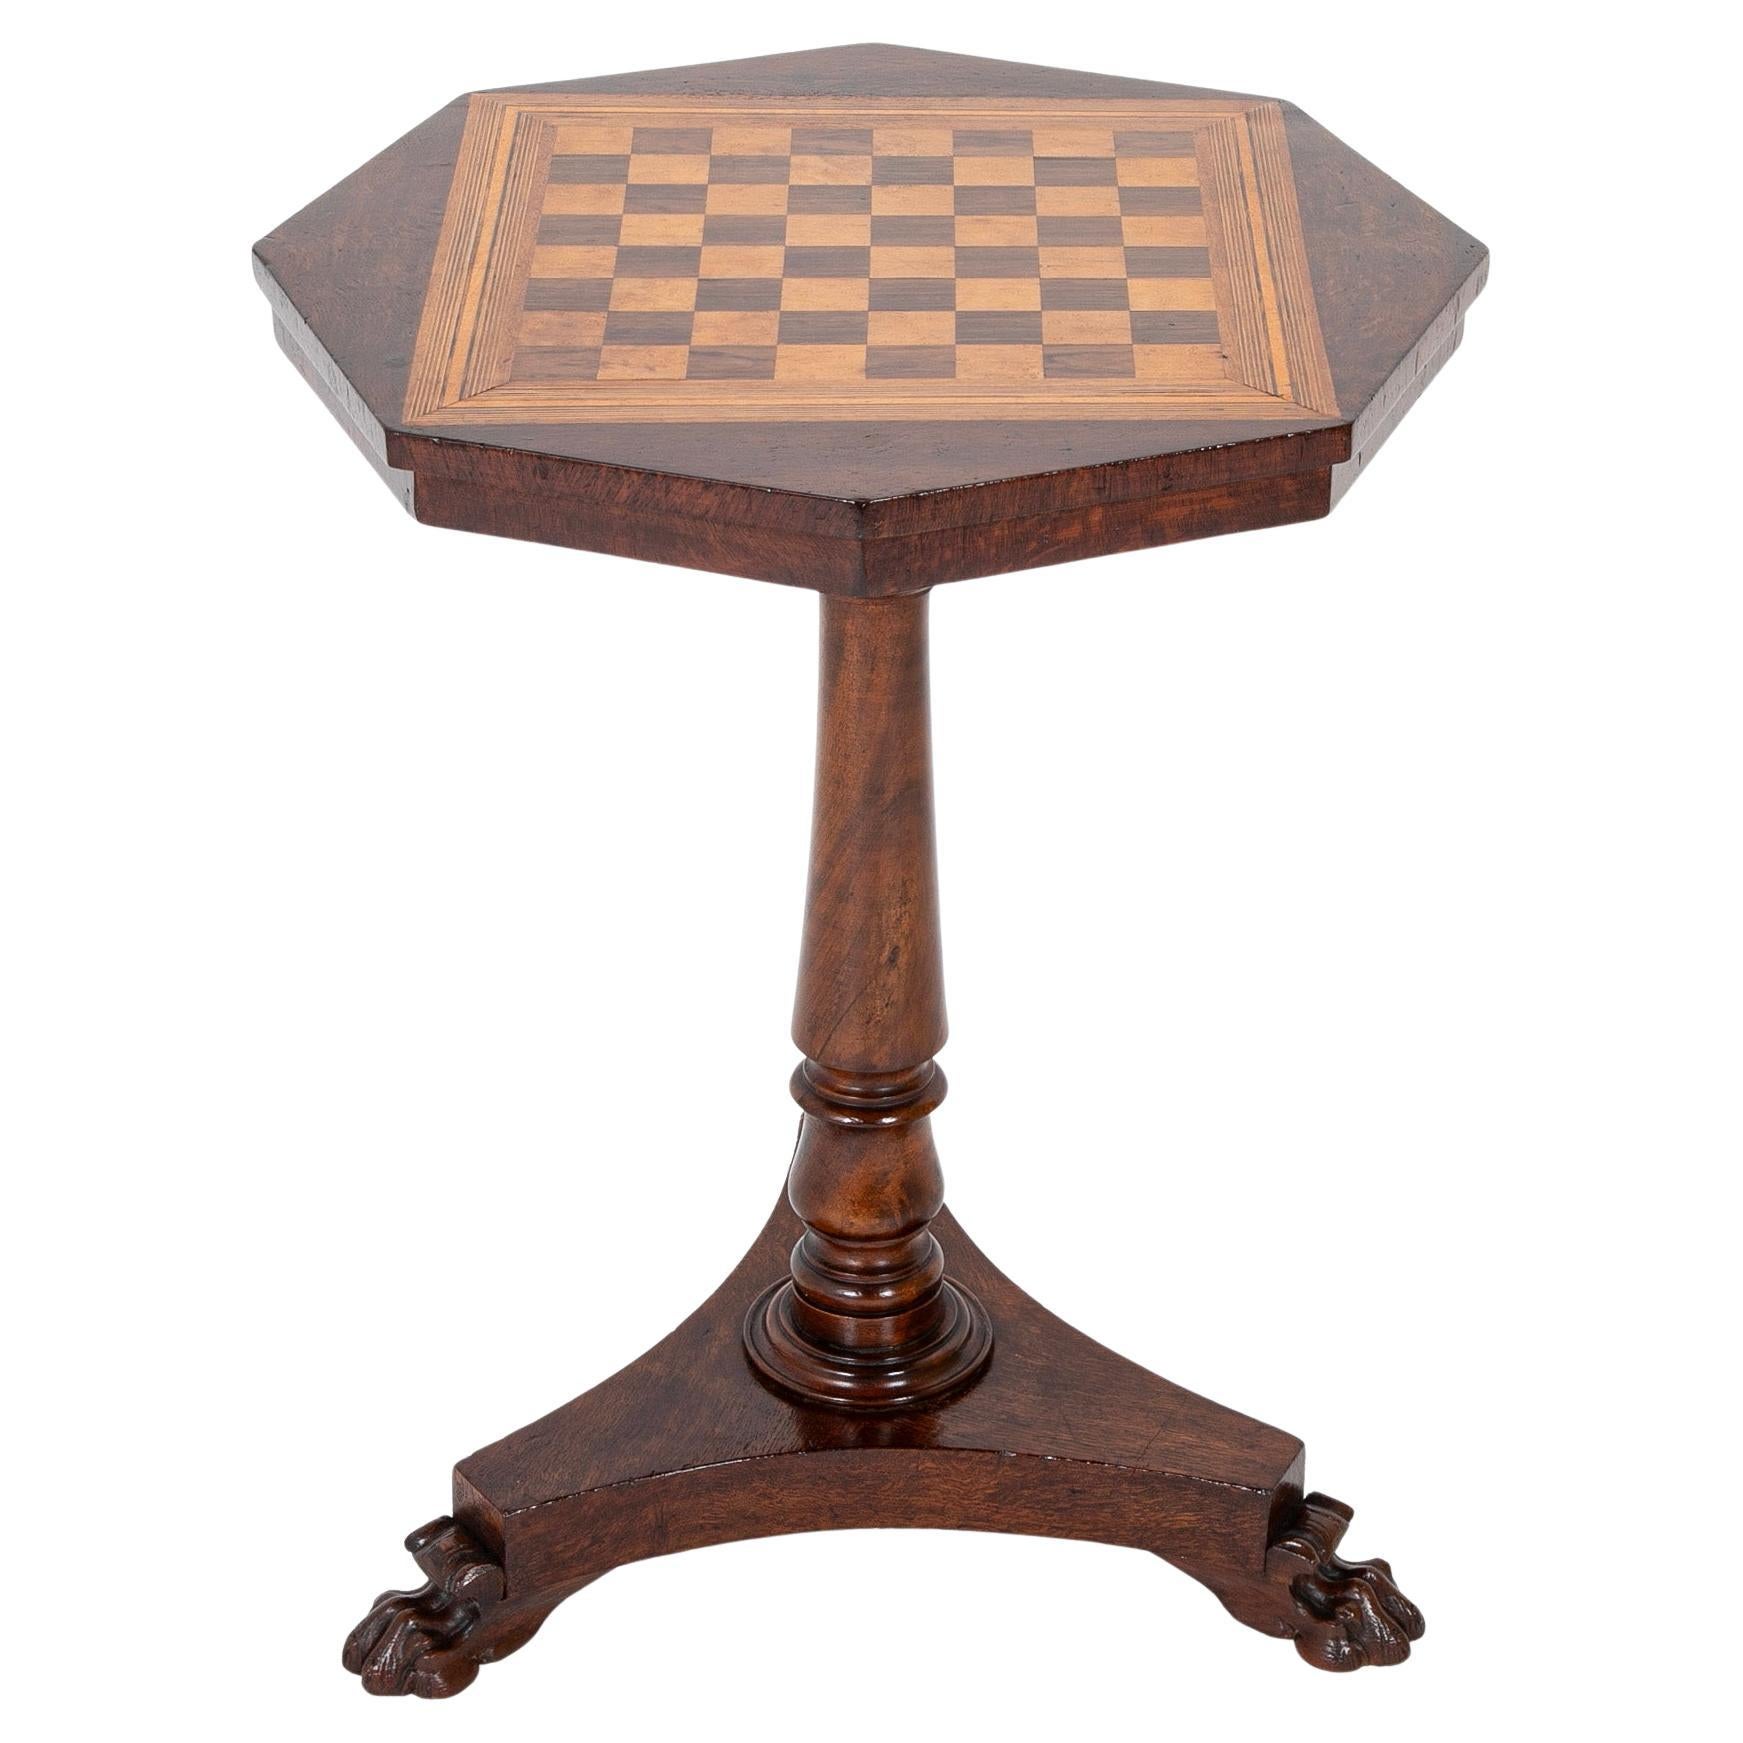 An Octagonal William IV Rosewood Games Table For Sale